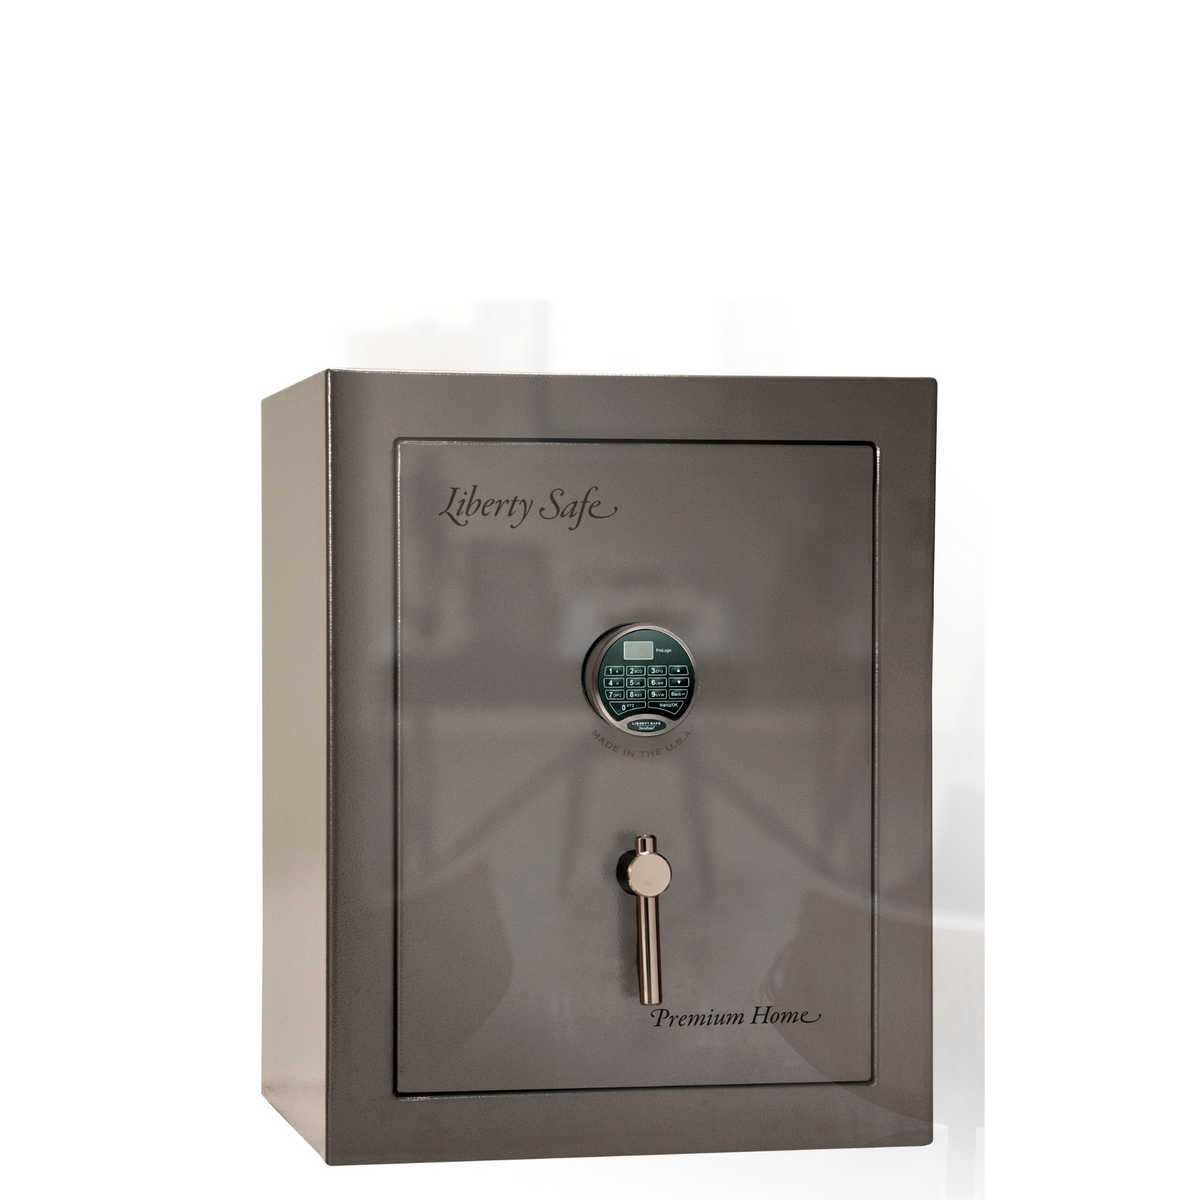 Premium Home Series | Level 7 Security | 2 Hour Fire Protection | 12 | Dimensions: 42&quot;(H) x 24&quot;(W) x 20.25&quot;(D) | Champagne Gloss - Closed Door